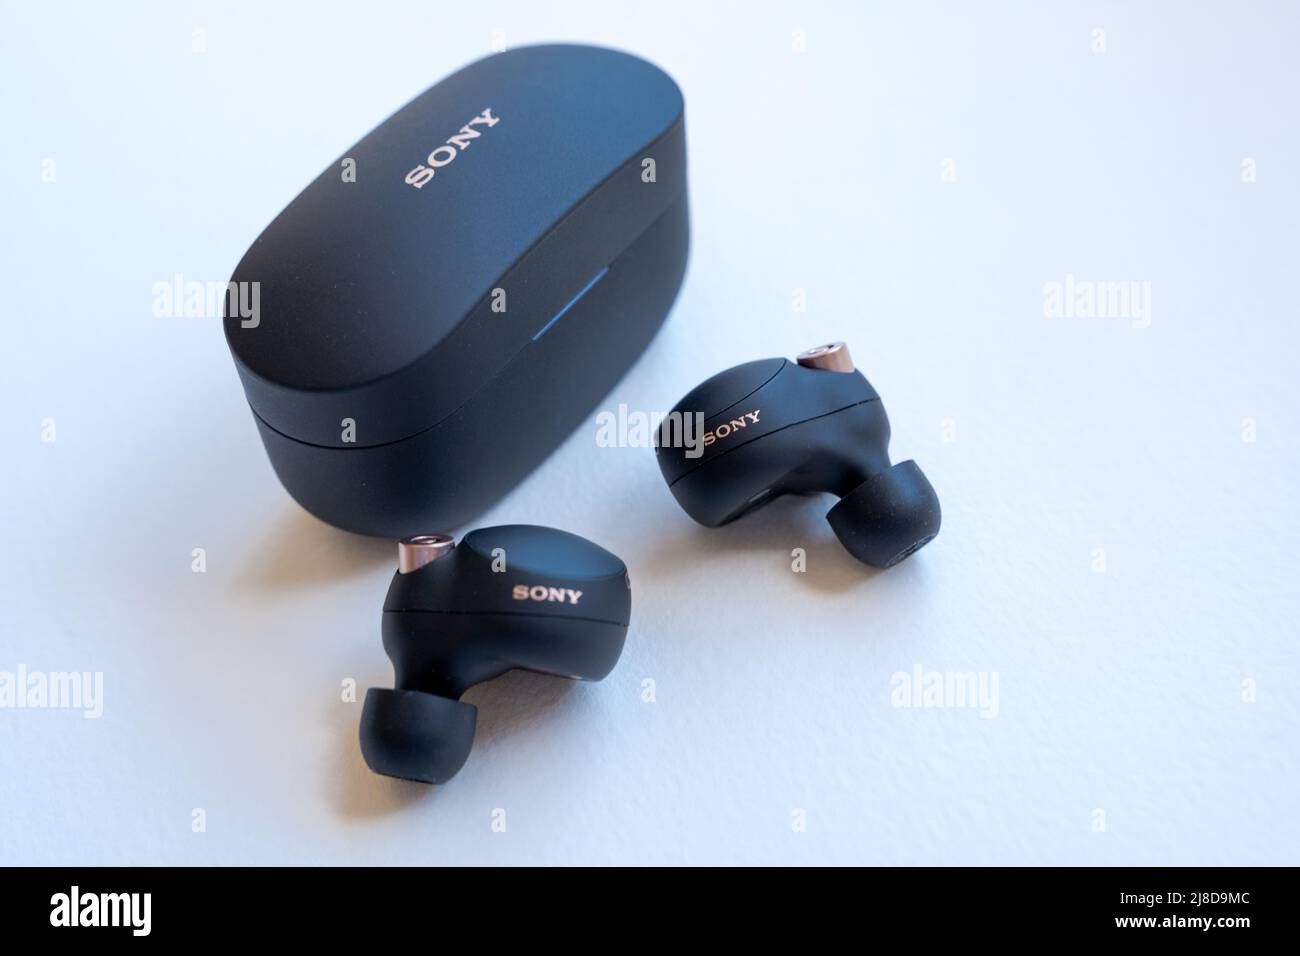 Open Box Sony WF-1000XM4 Industry Leading Noise Canceling Truly Wireless  Earbud Headphones with Alexa Built-in, Black 